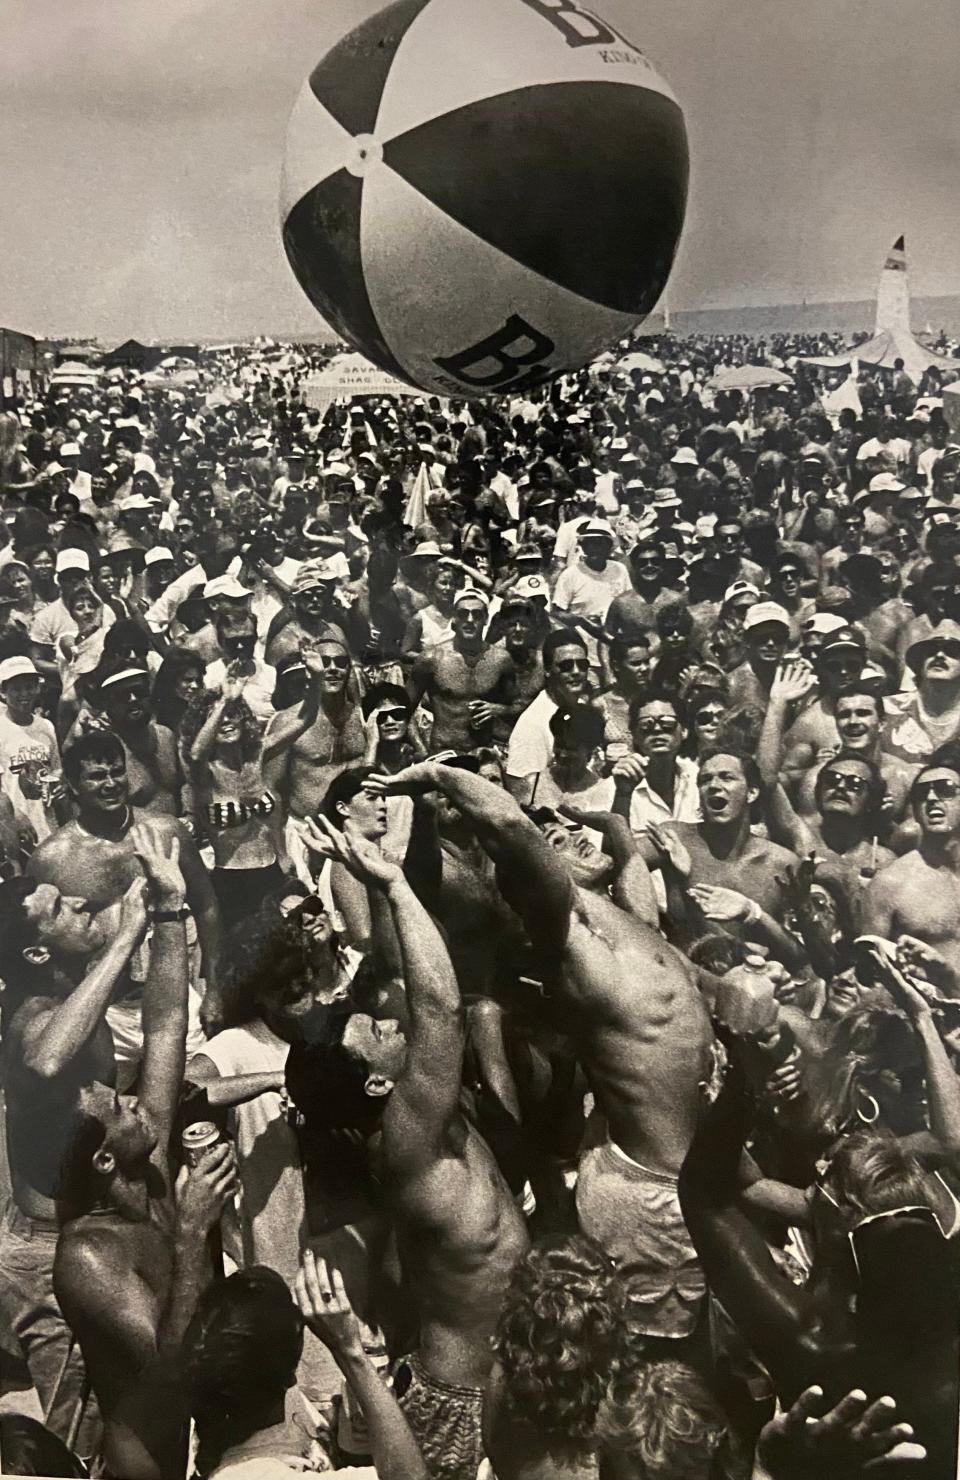 There seemed to be a lot of energy at 1989's Beach Music Festival on Jekyll Island. The archived Times-Union photo request that accompanied the story alerted the photographer to what he might expect: "A bunch of buzzed people in shorts doing the shag on the beach." Sounds about right.